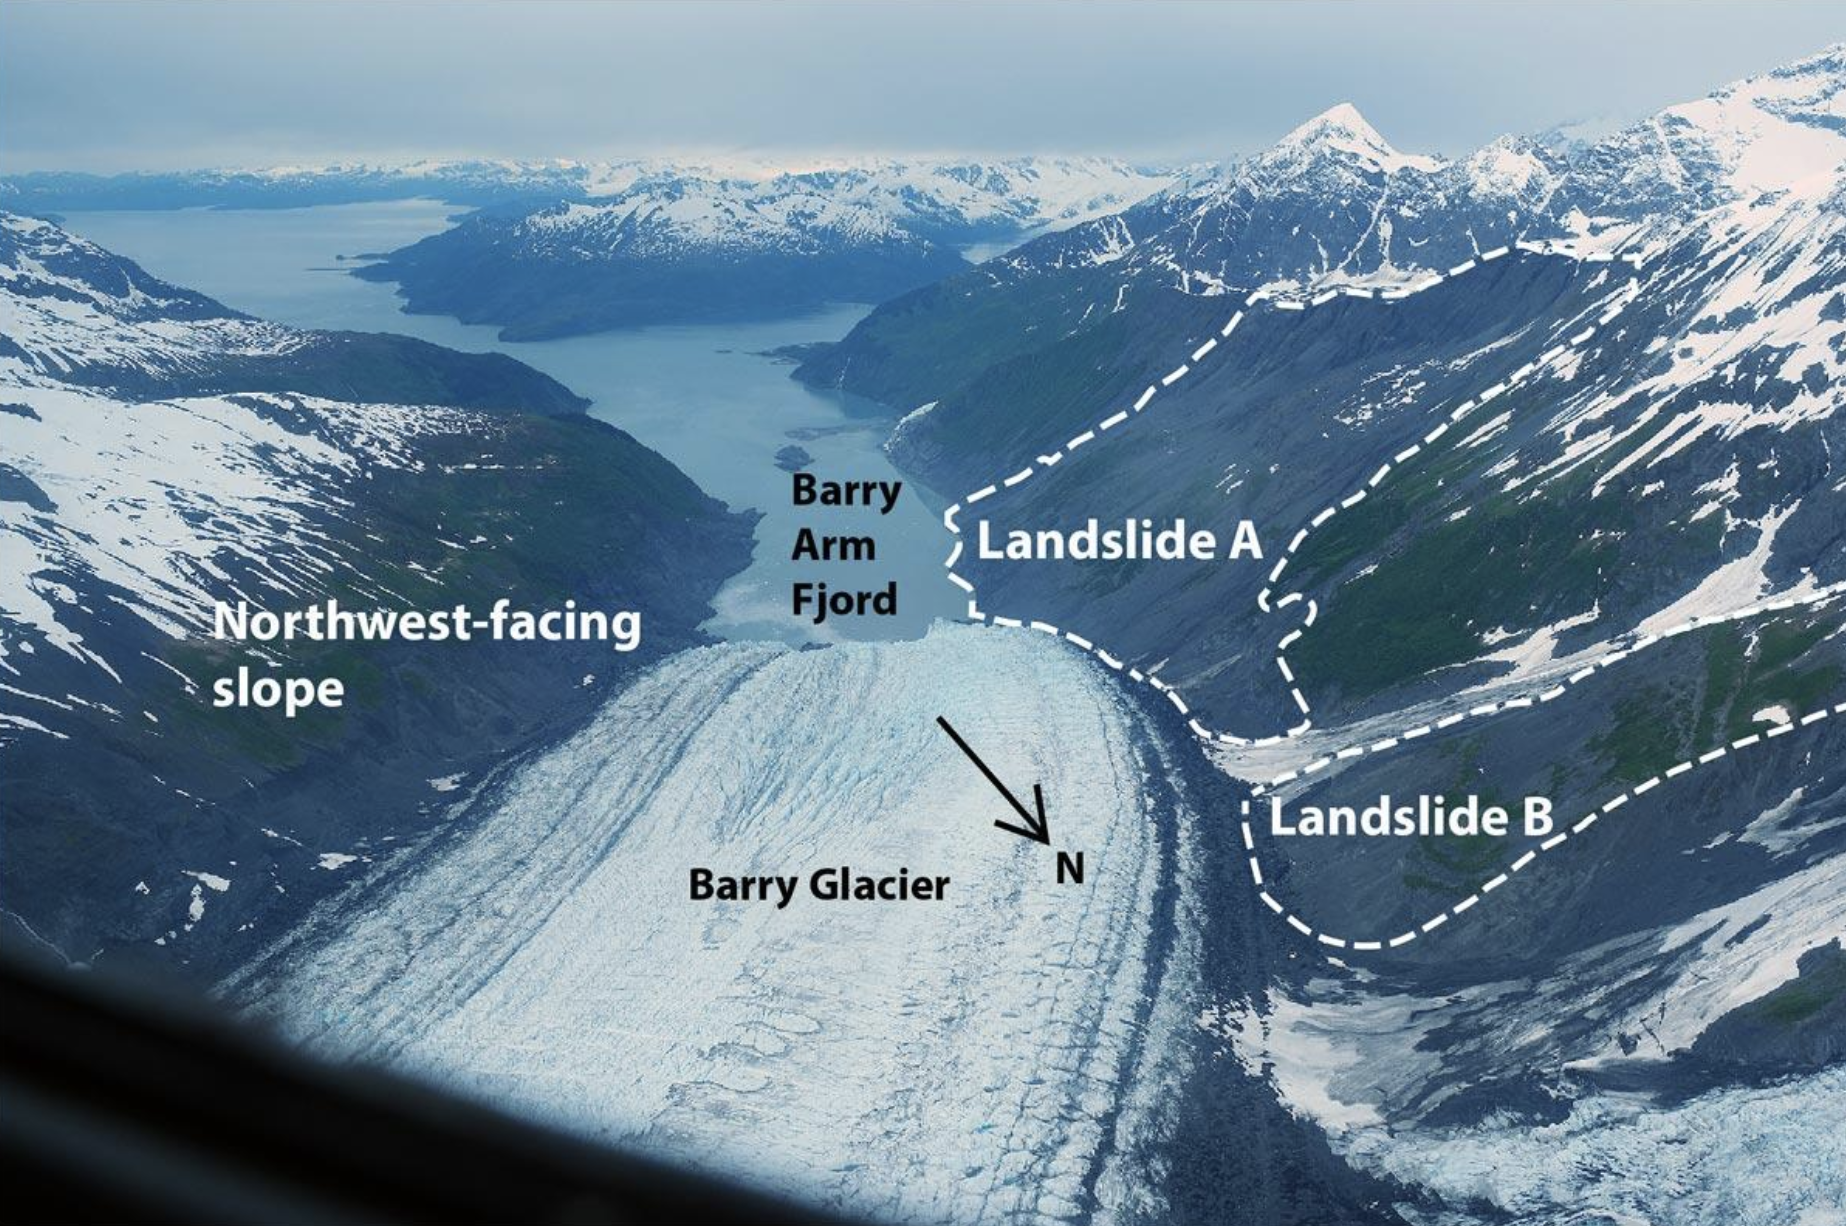 An aerial photo shows potential landslide zones that could generate tsunamis near the Barry Glacier.